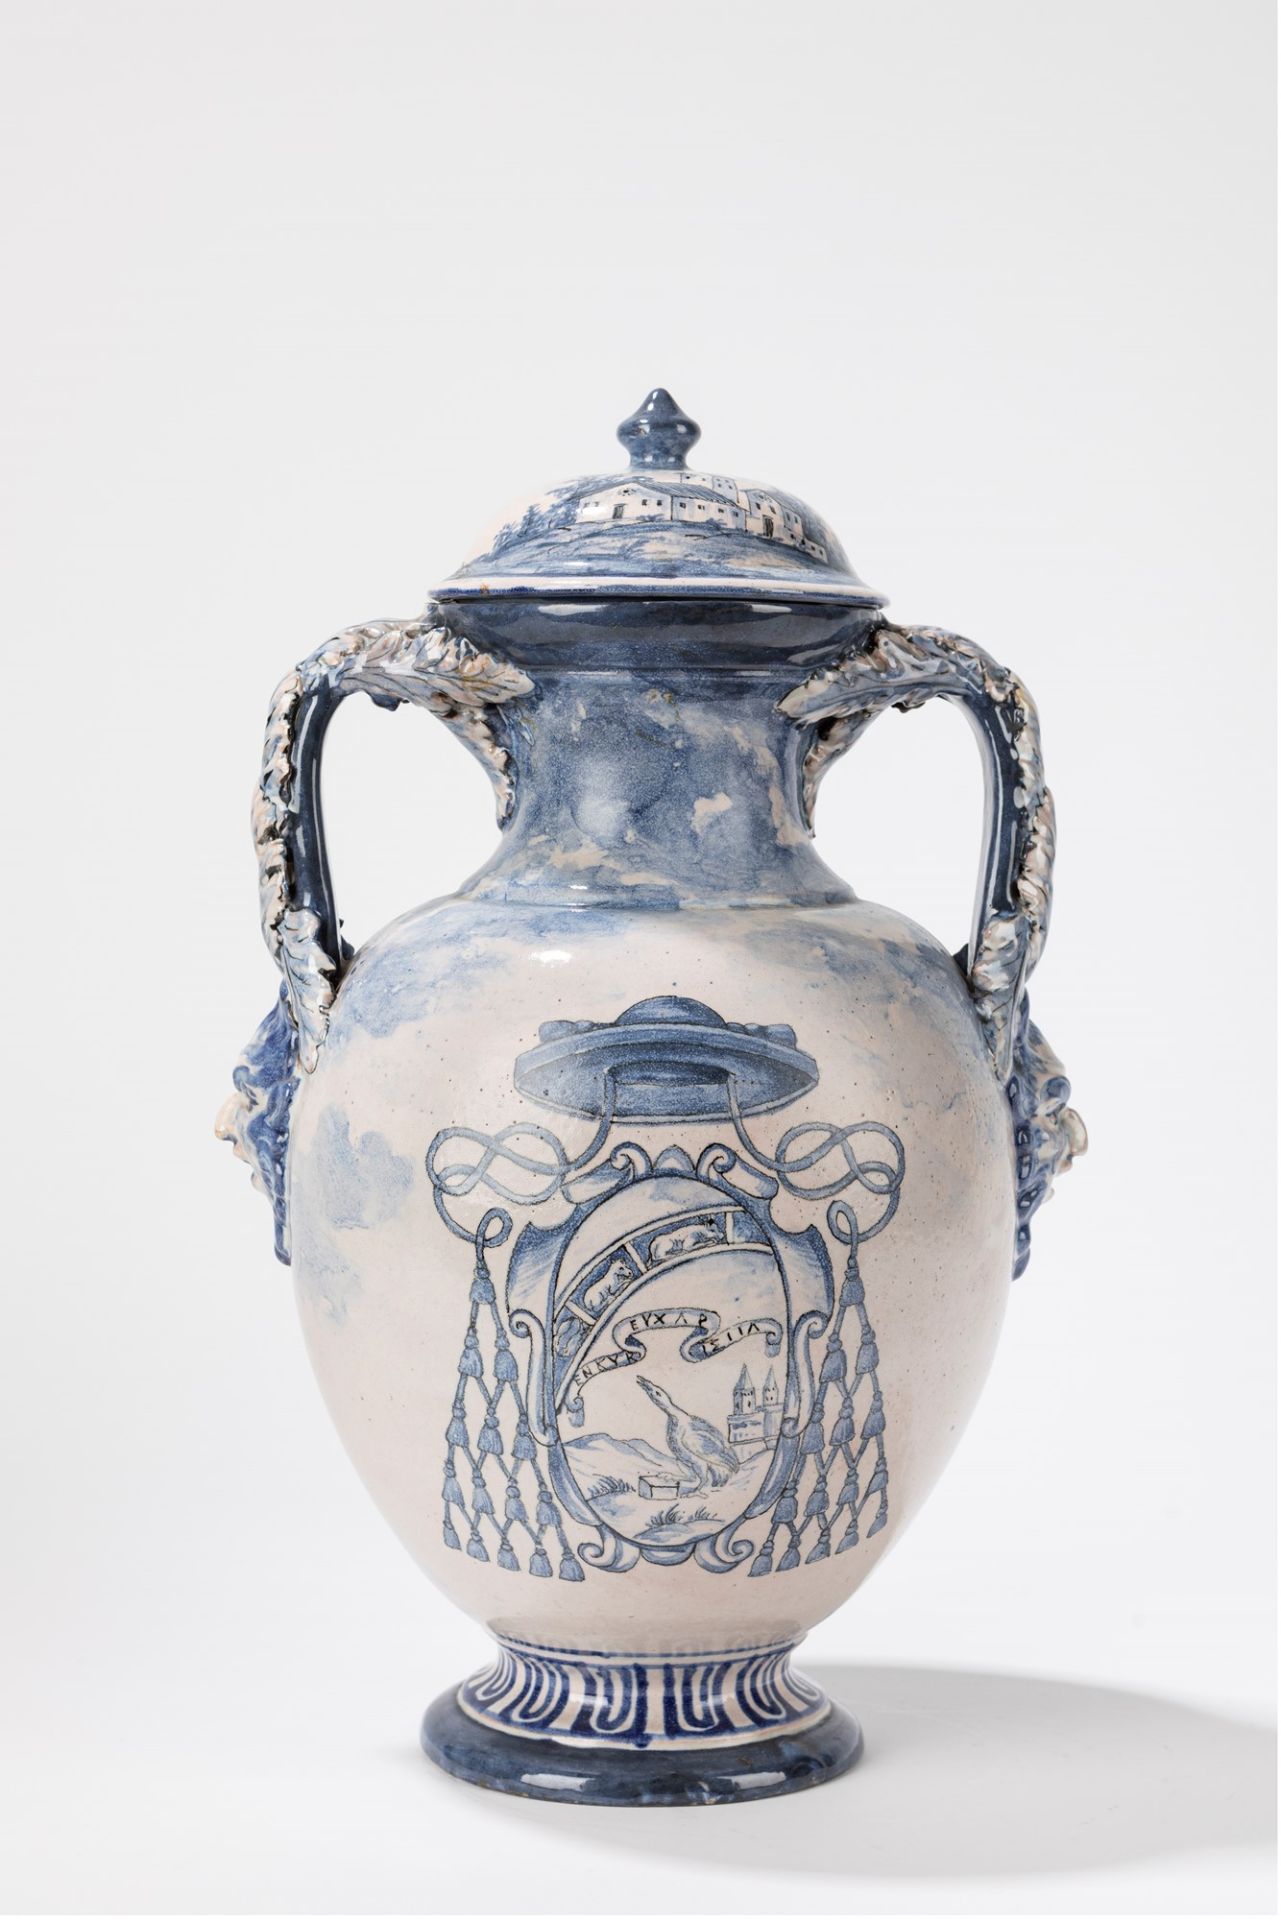 Two-handled vase in white and blue ceramic from Savona. 19th century